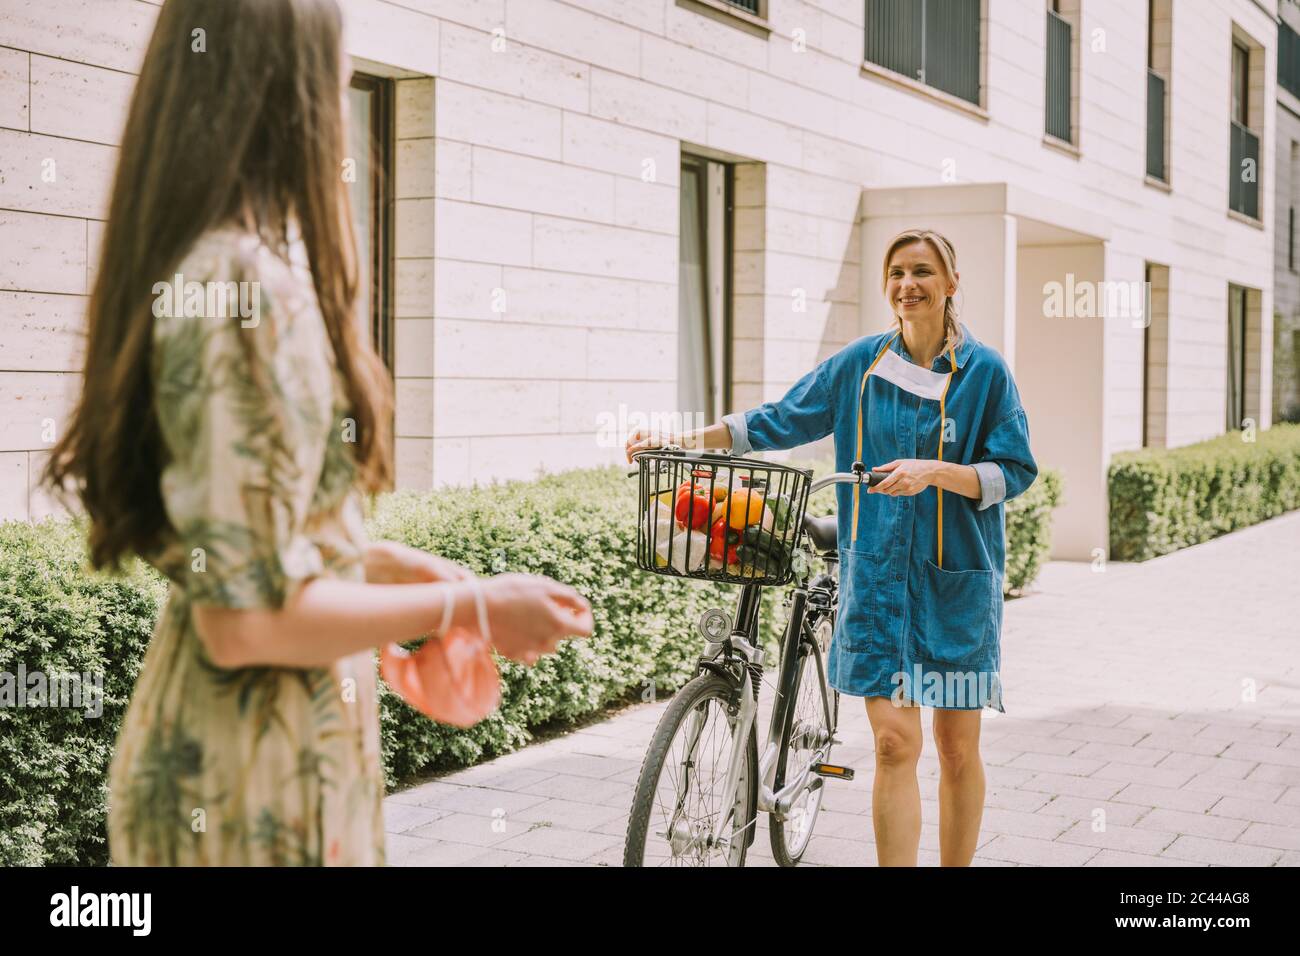 Two women with bicycle and face mask meeting in urban area Stock Photo